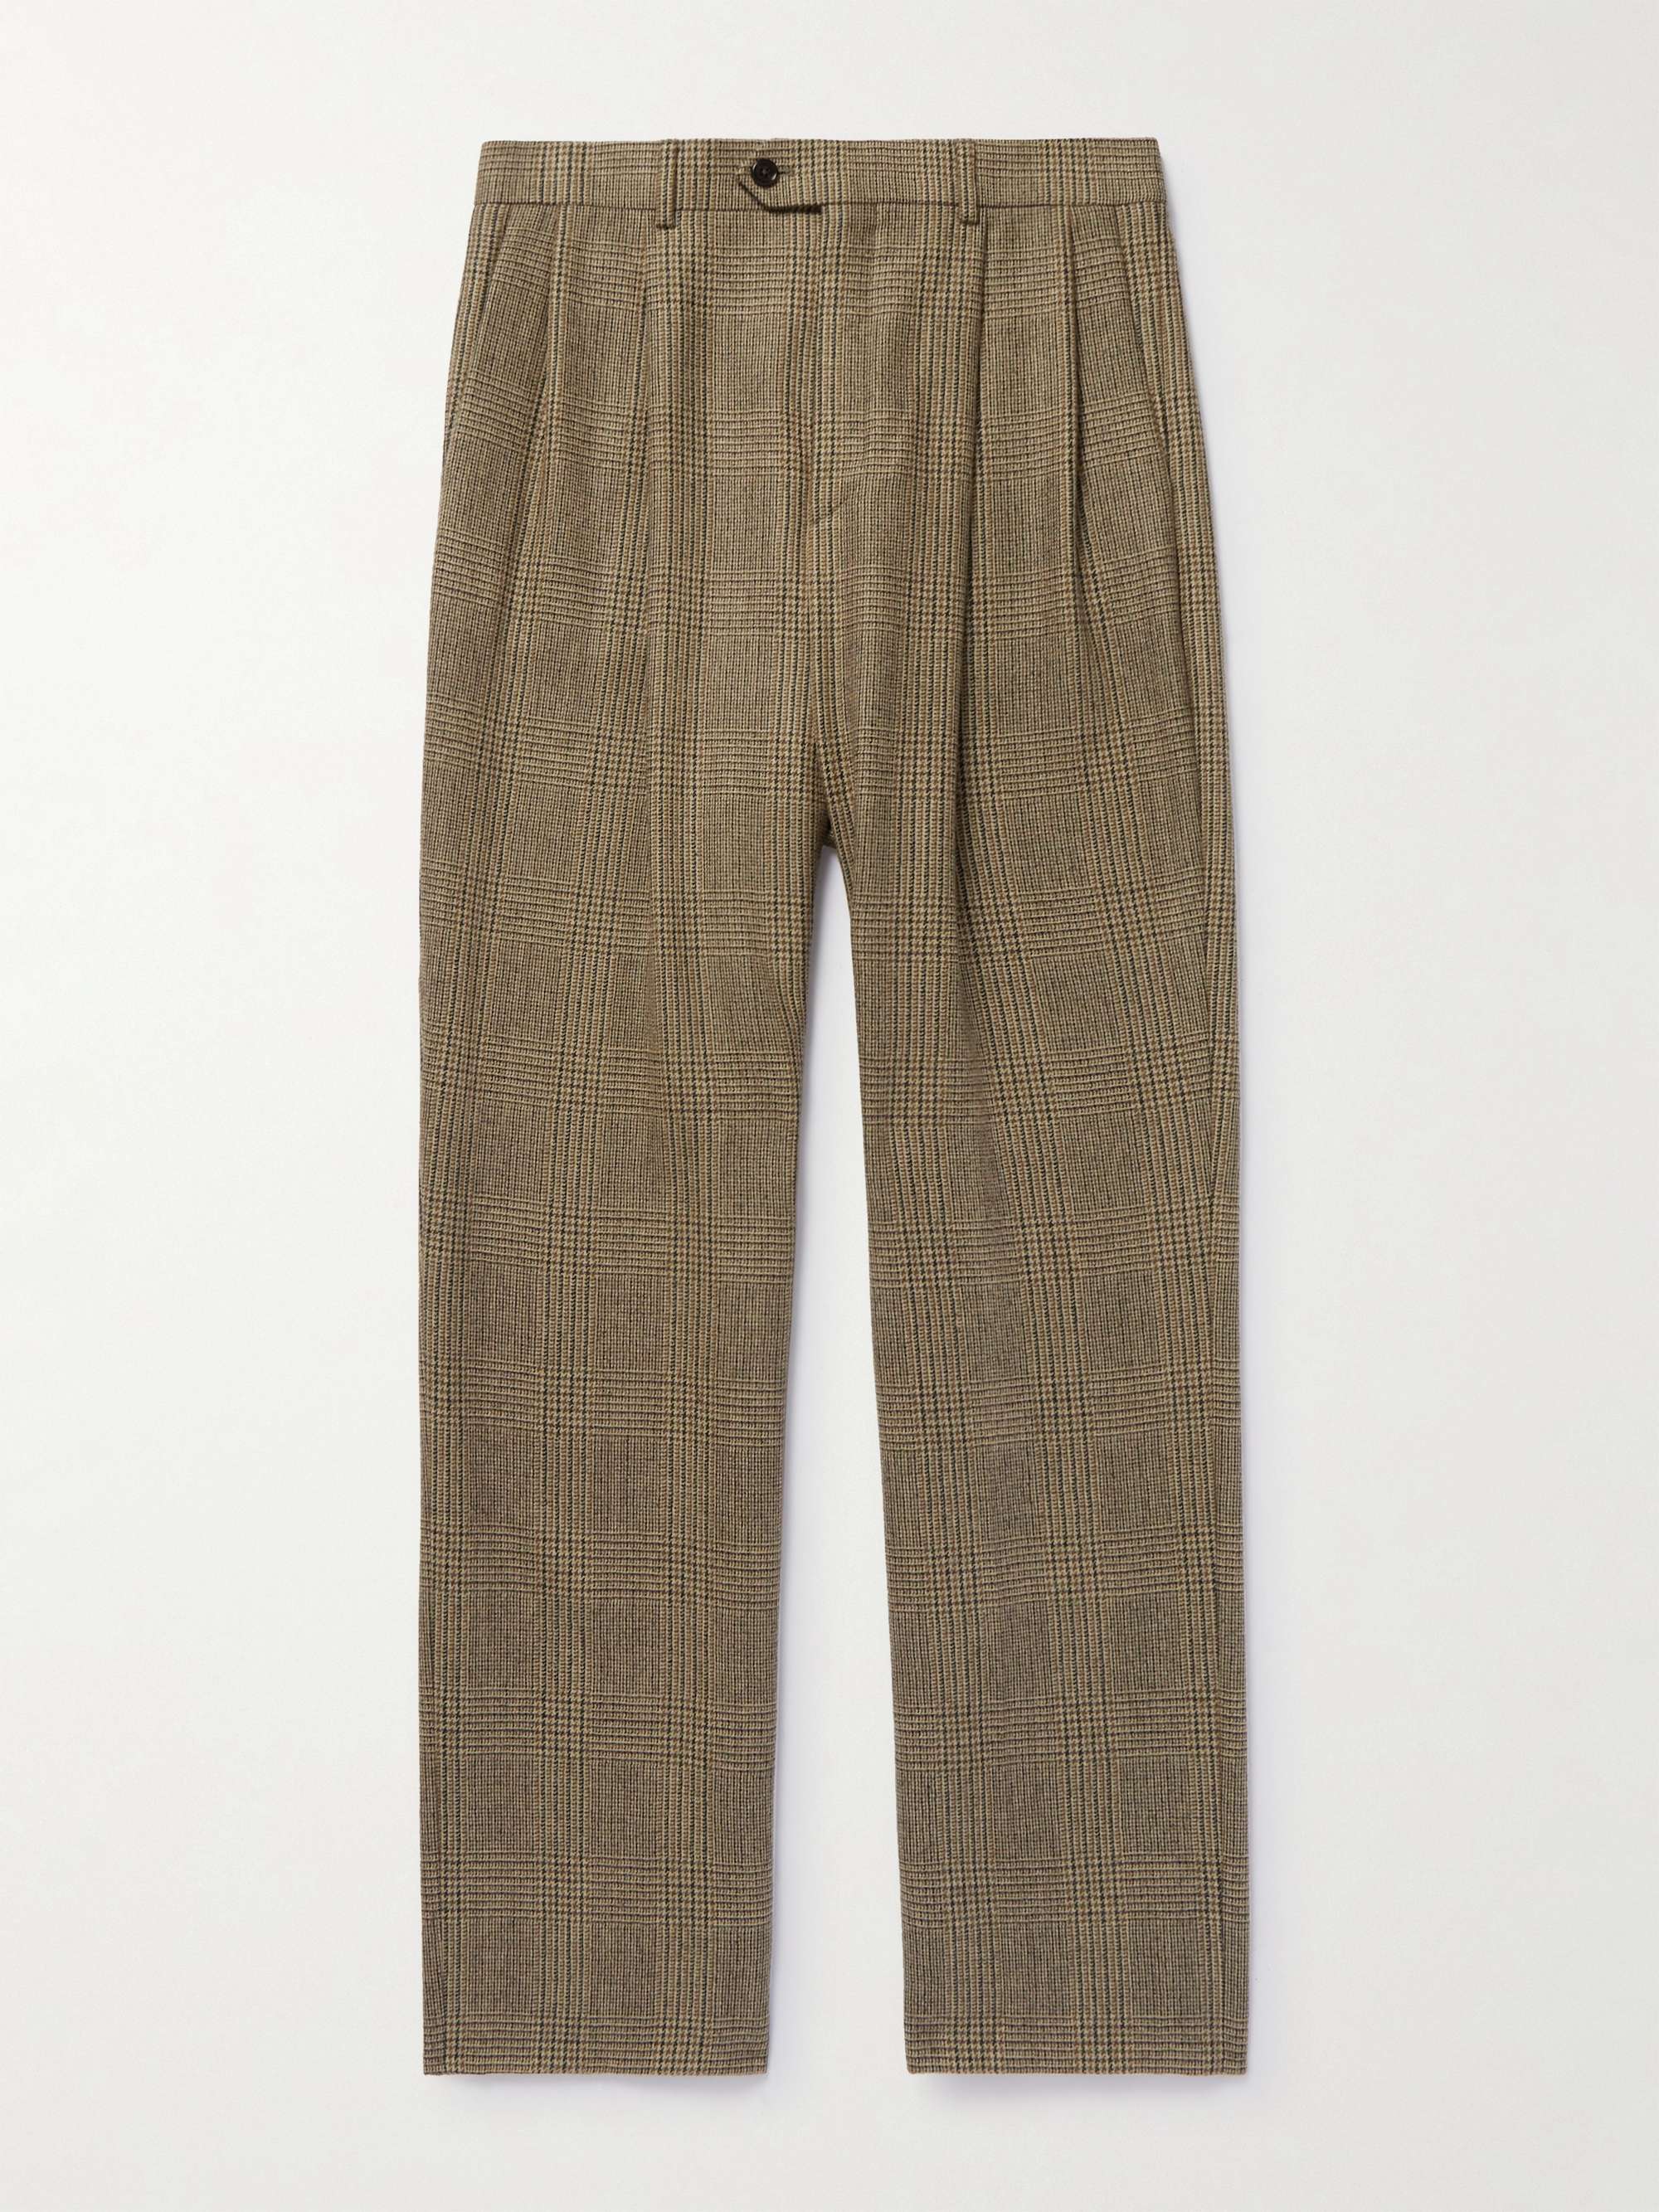 ❌❌❌SOLD❌❌❌ Celine Logo Waistband Wide Leg Trousers in Grey Wool Flannel  🤍From Fall 2018🤍 Size: 38. Measurements: wais